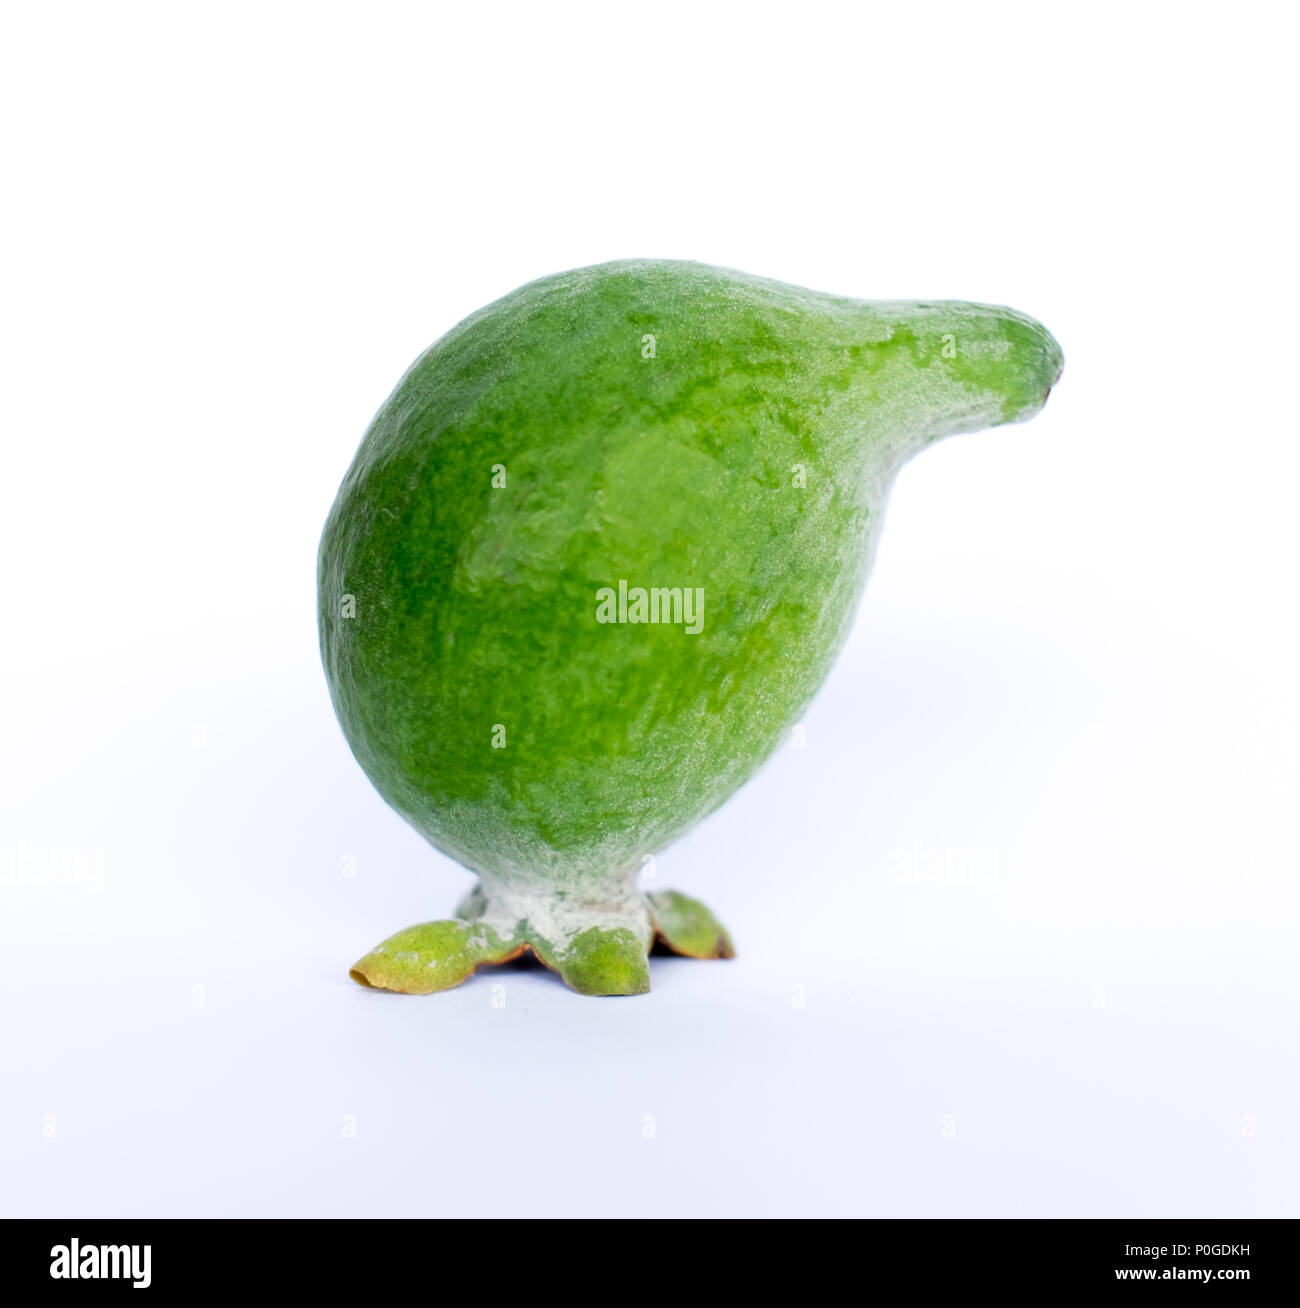 Funny deformed feijoa green fruit in the shape of a kiwi or other bird, photographed in New Zealand, NZ Stock Photo